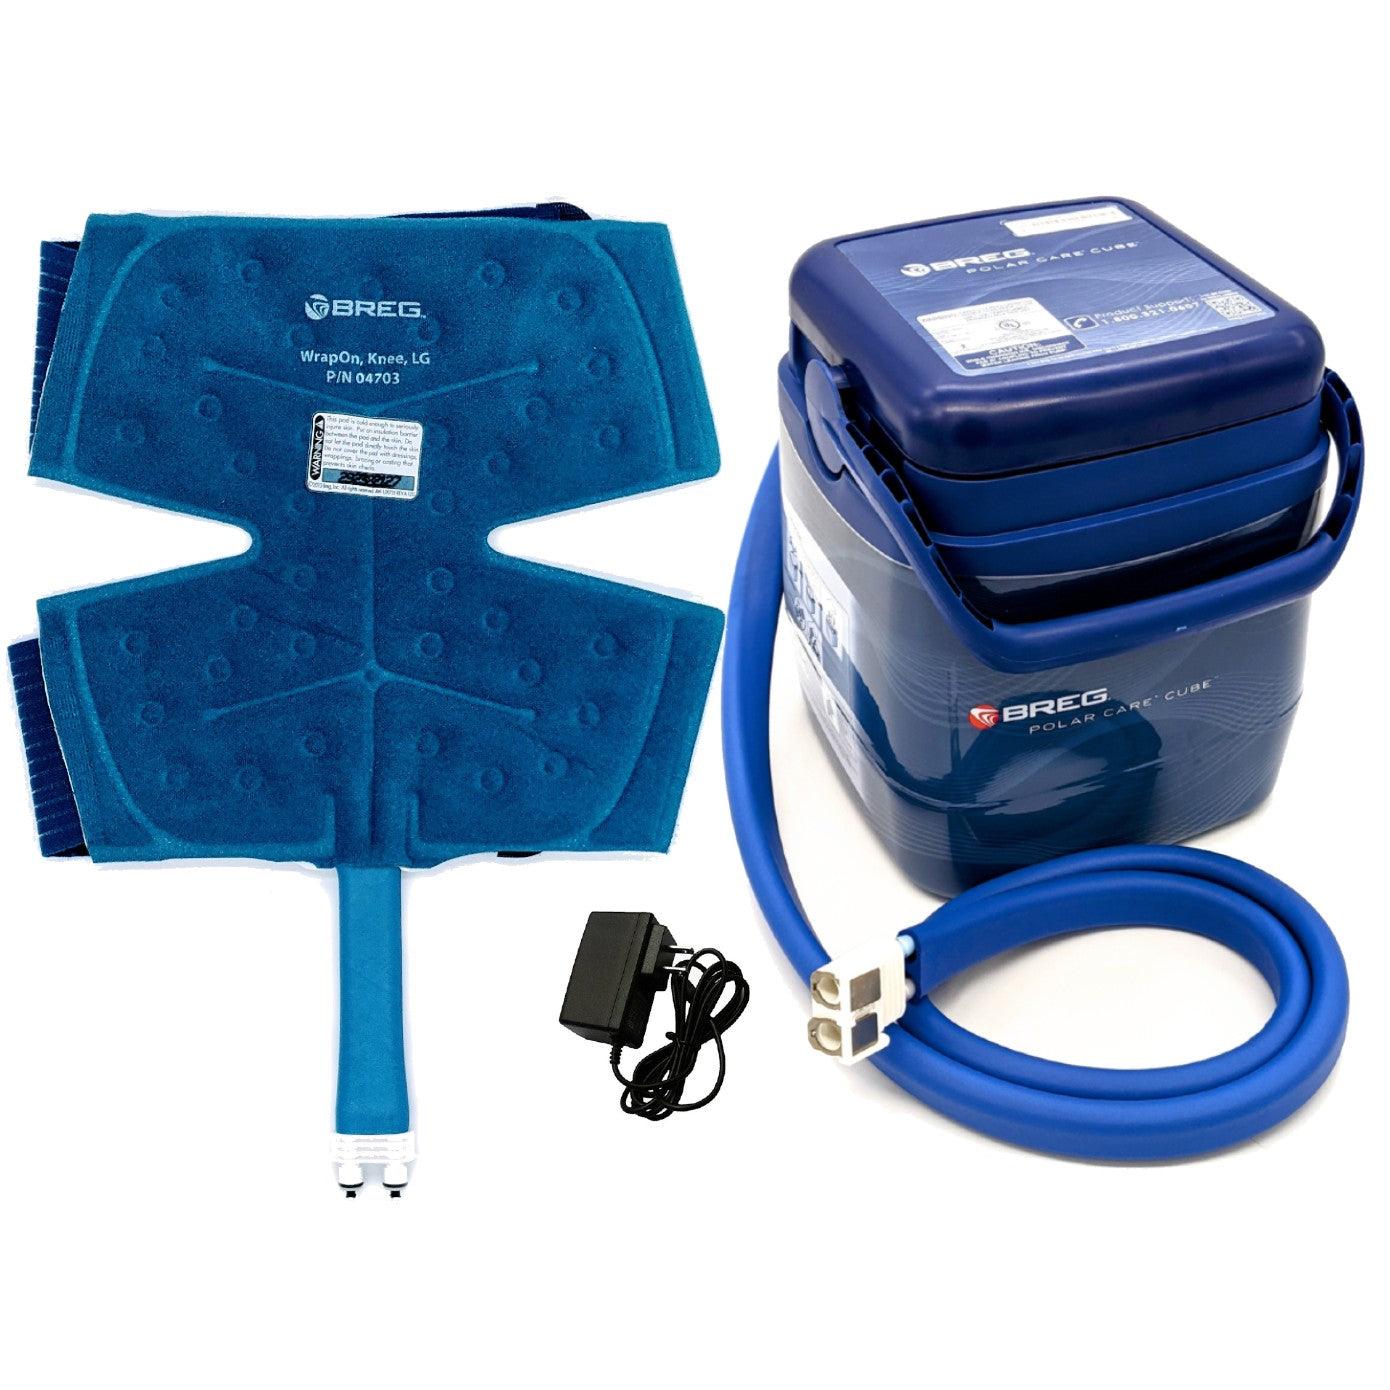 Breg® Polar Care Cube System w/ Wrap-On Pads - 10701-04703 Breg® Polar Care Cube System w/ Wrap-On Pads - undefined by Supply Physical Therapy Breg, Cold Therapy Units, Combos, Cube